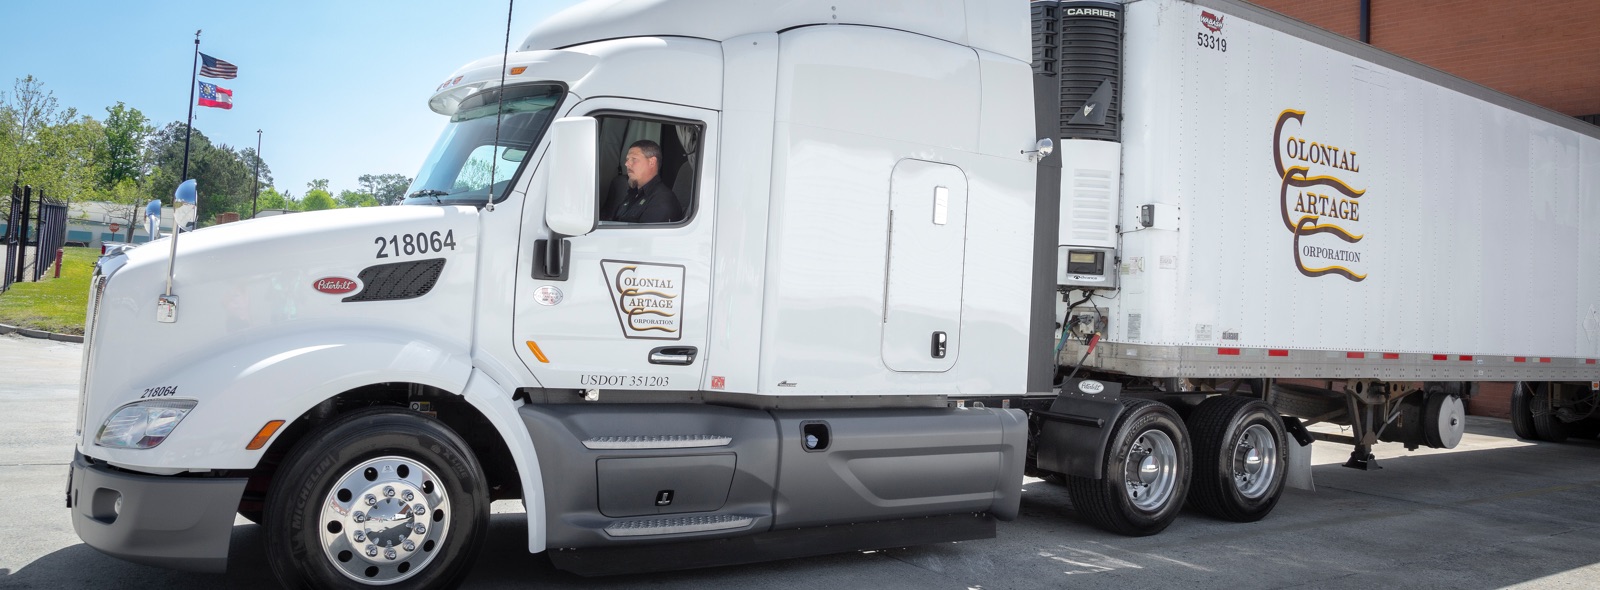 Colonial Cartage Prioritizes Safety for Drivers & Deliveries